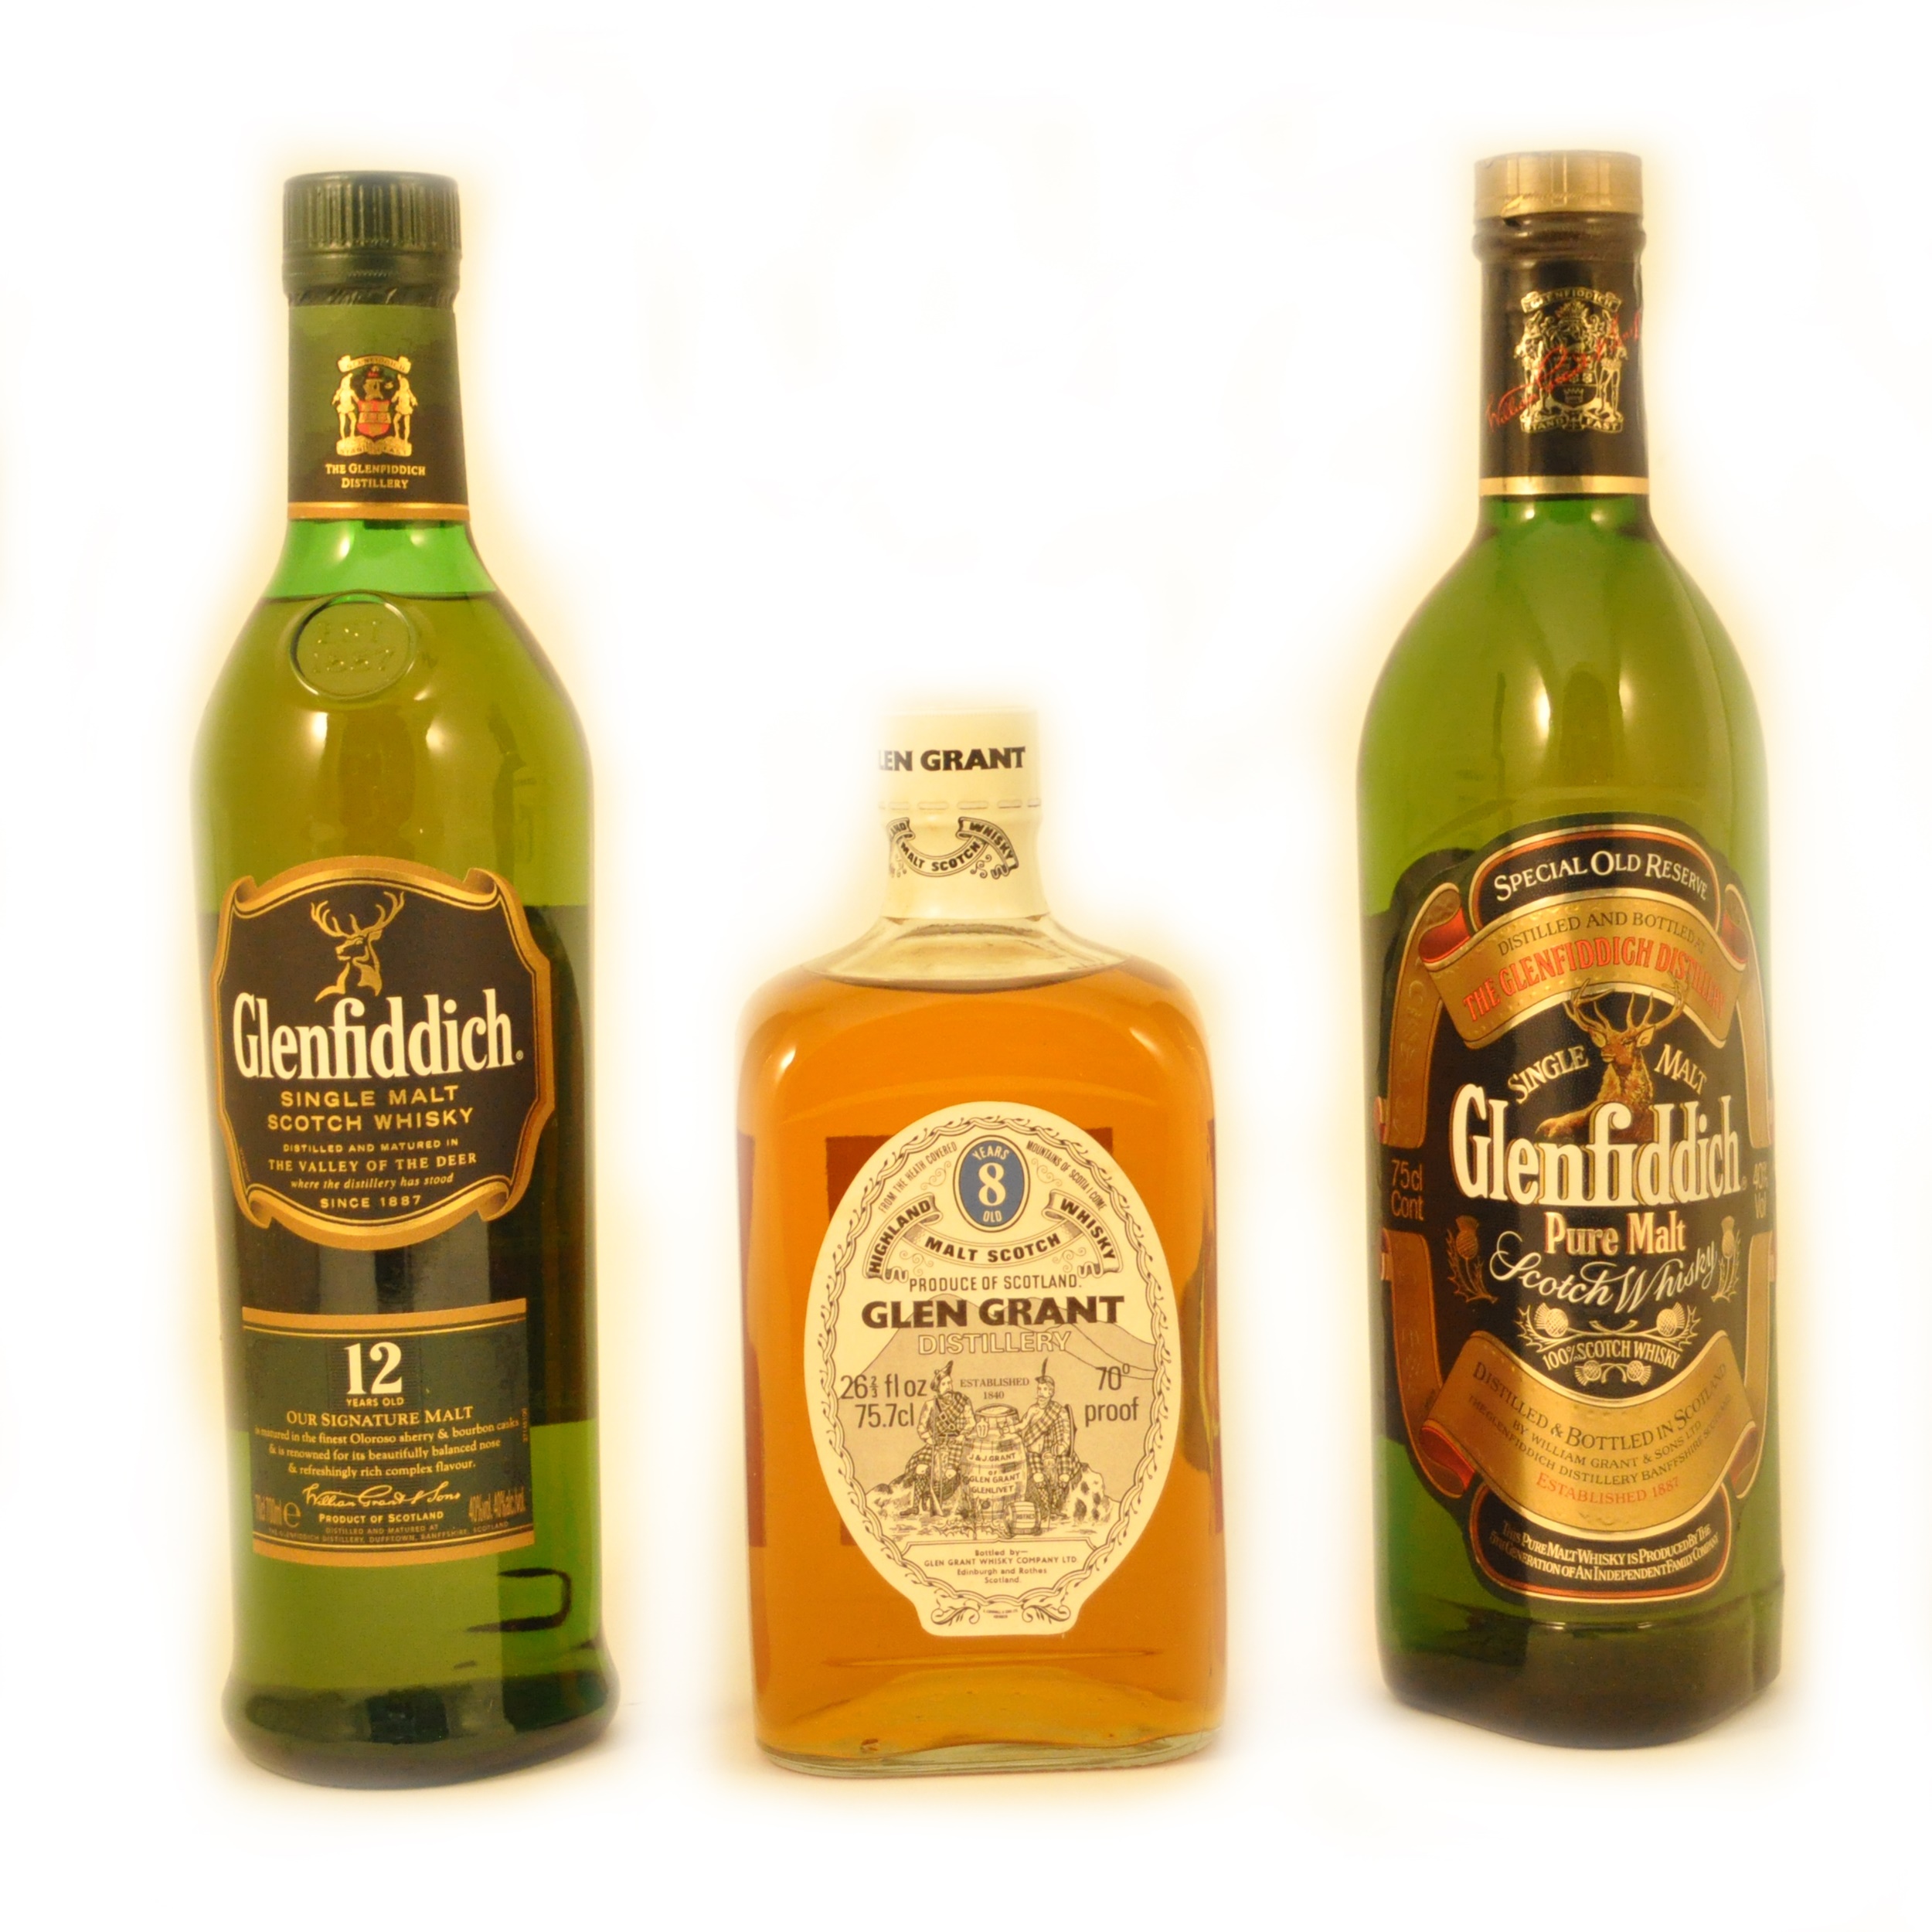 Glenfiddich Special Old Reserve Pure Malt Whisky, and 12 years old single malt; and Glen Grant 8